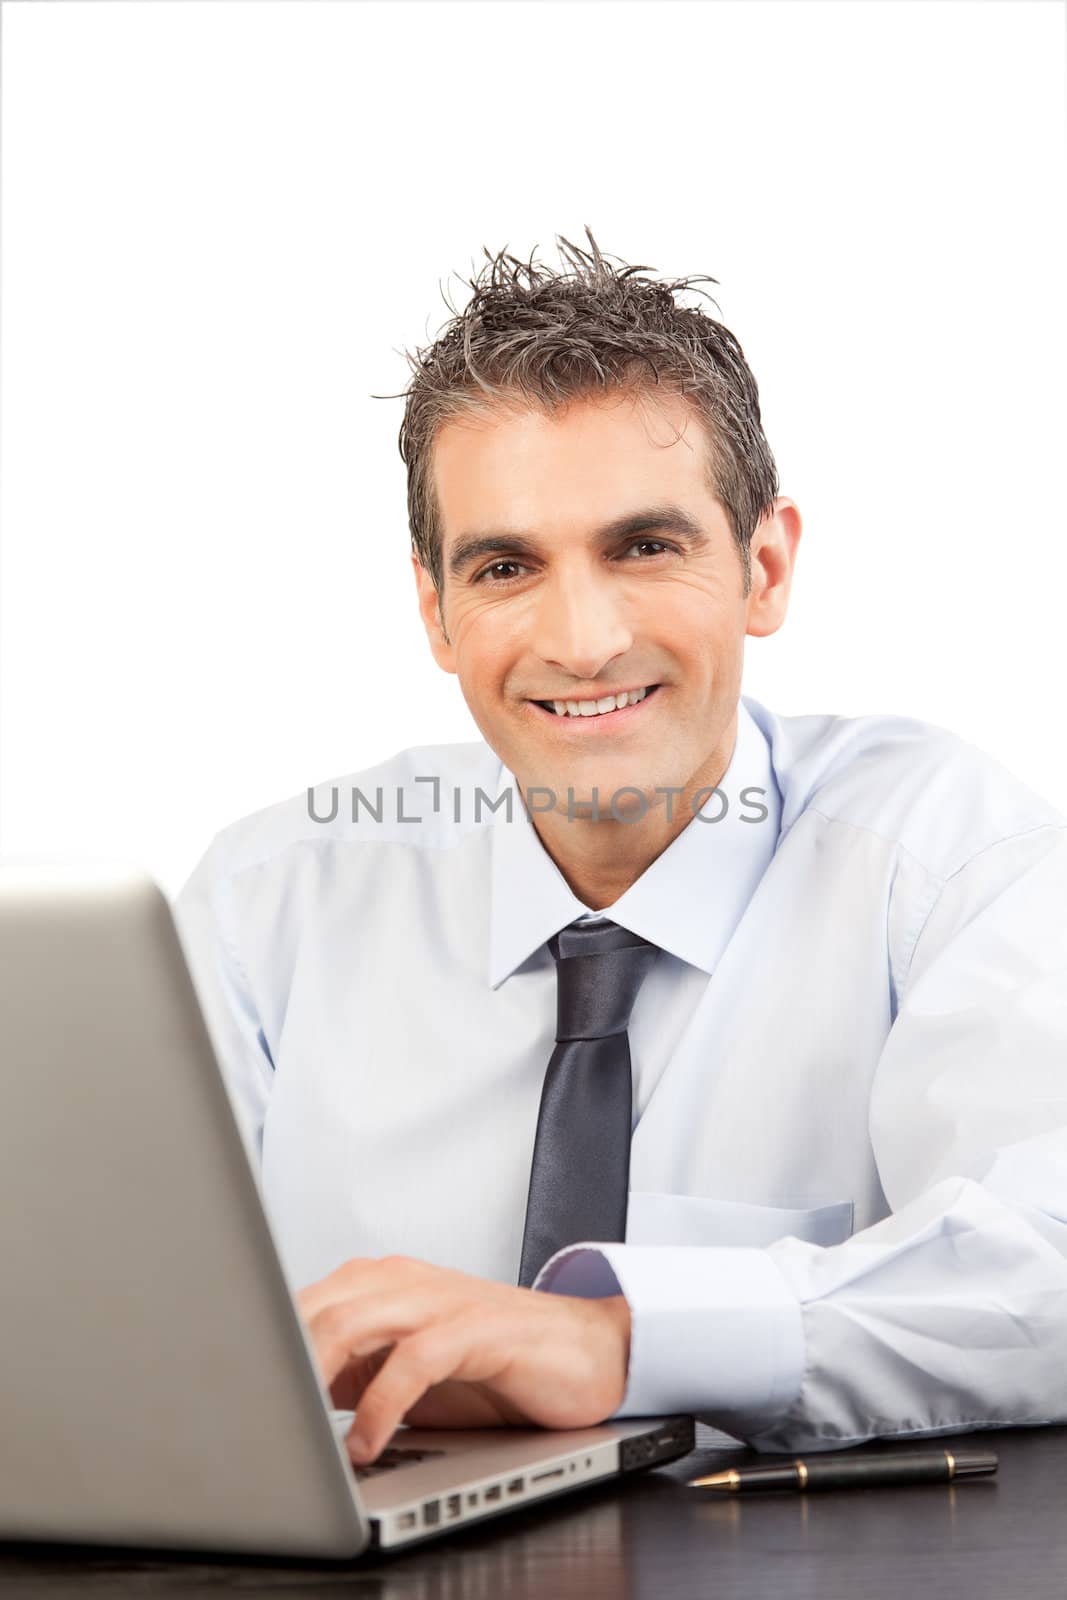 Businessman using laptop at work in office isolated on white background.